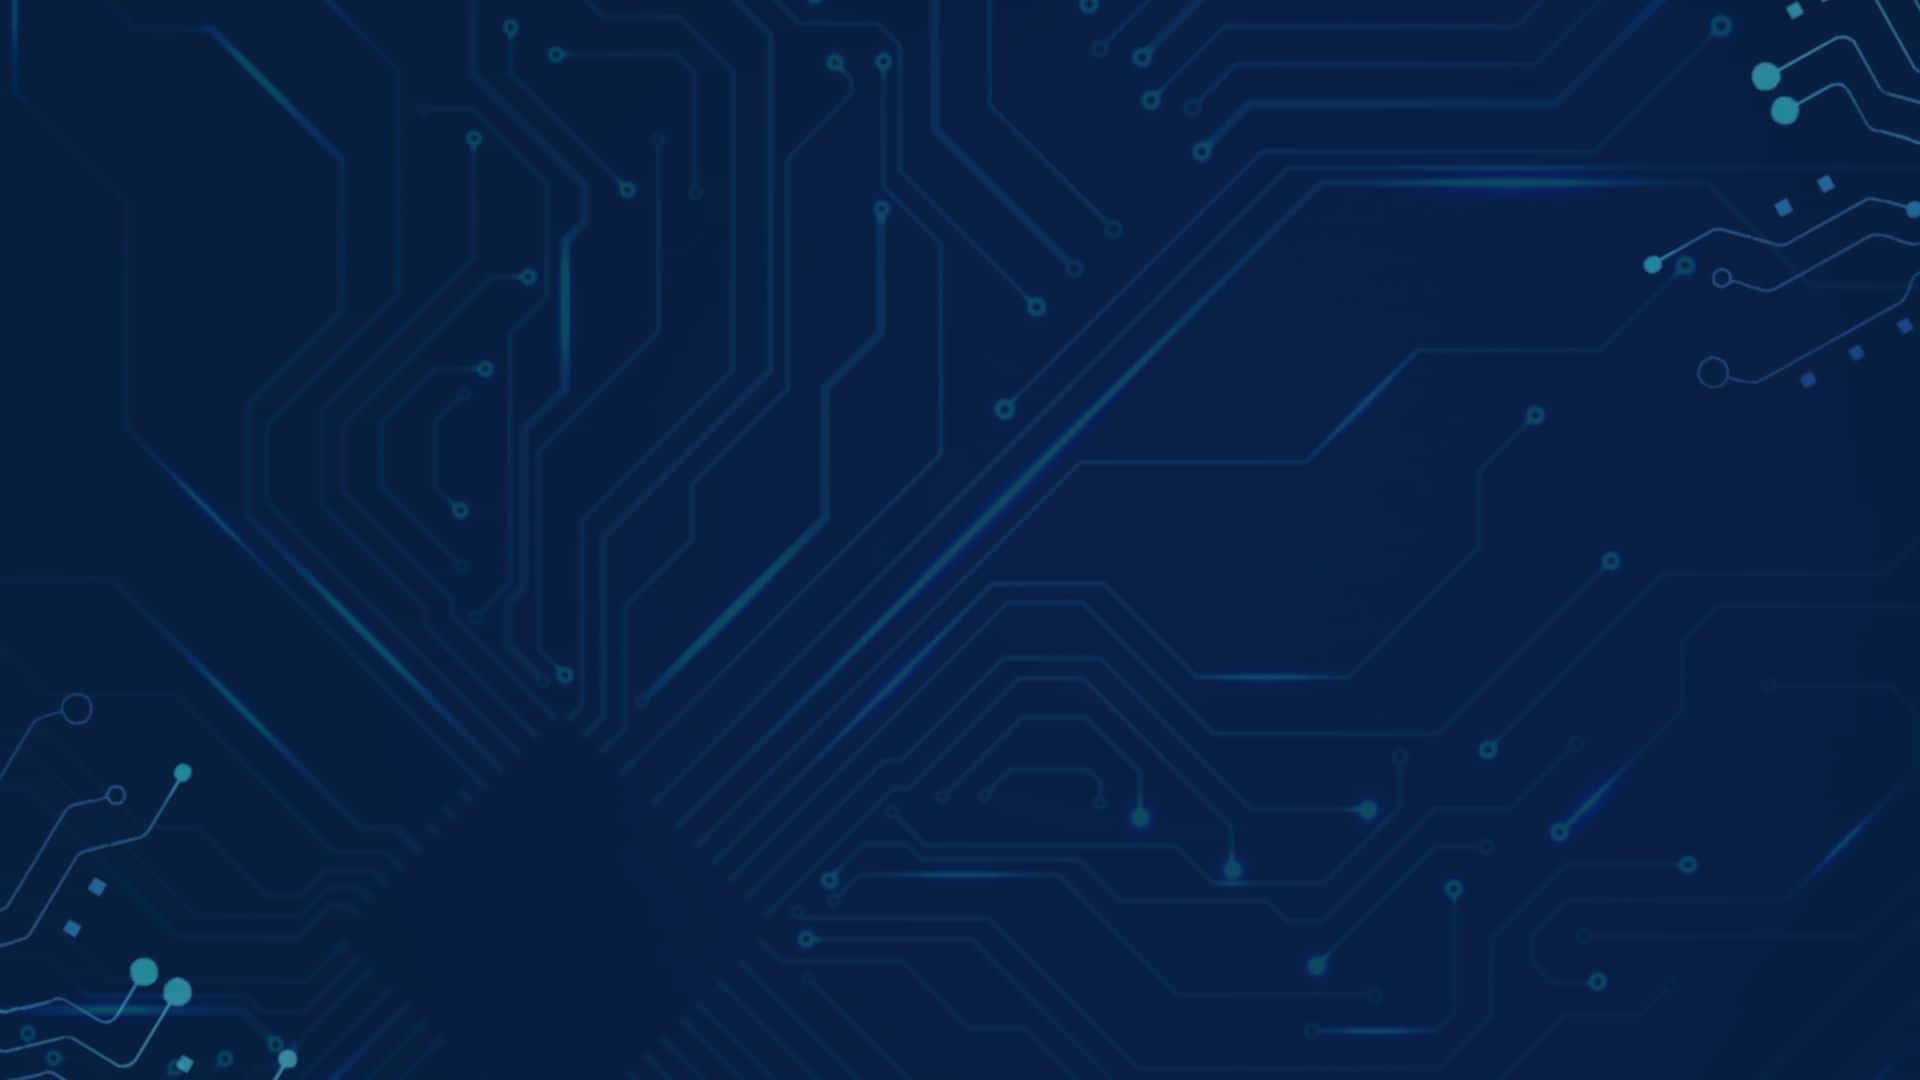 A Blue Circuit Board Background With Blue Lines